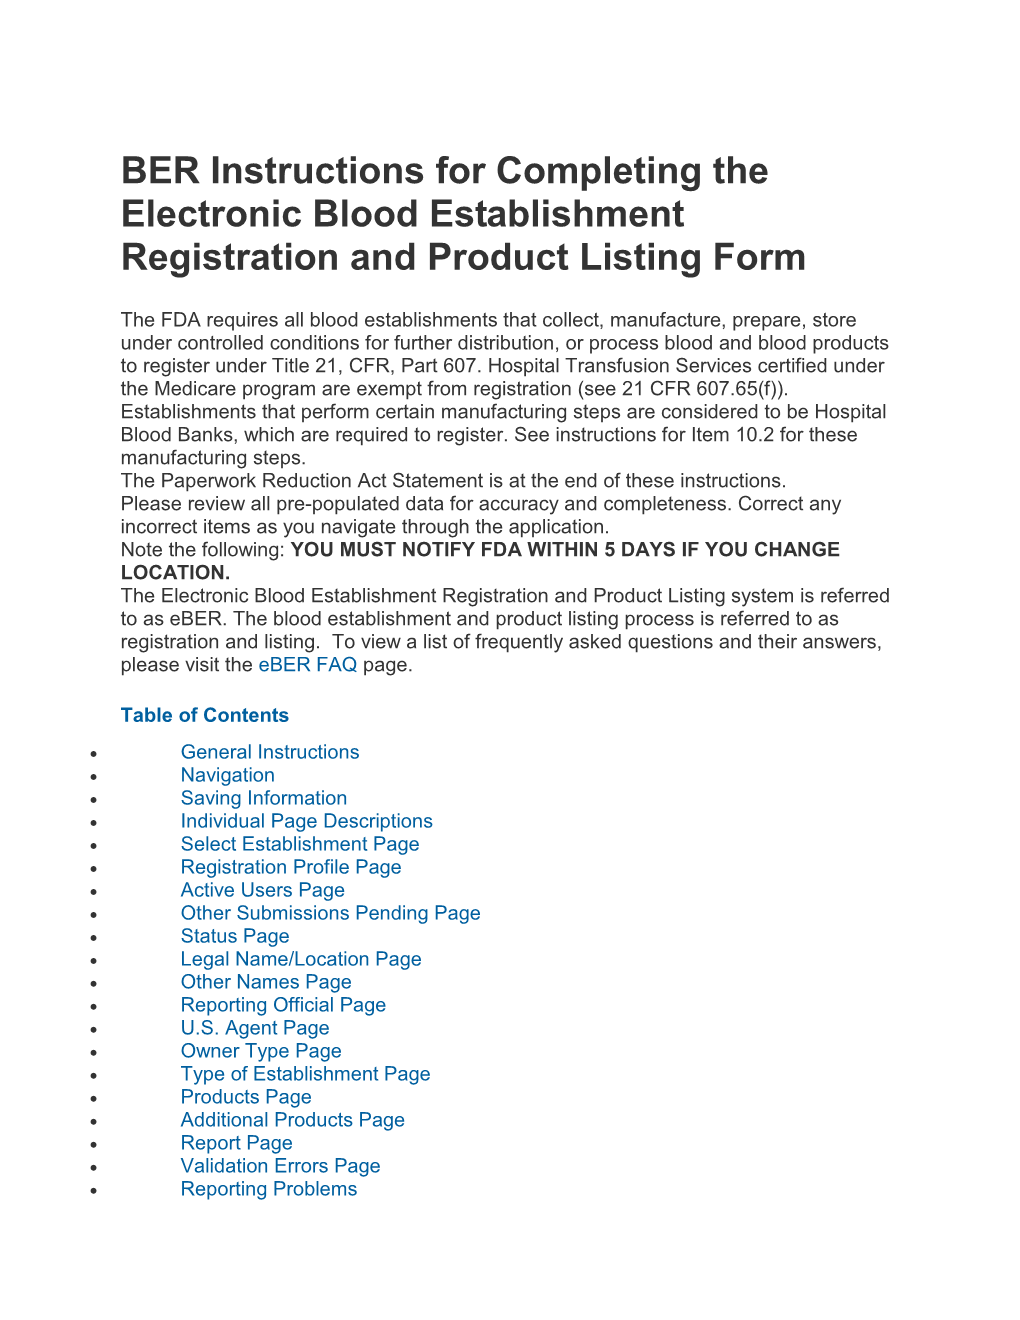 BER Instructions for Completing the Electronic Blood Establishment